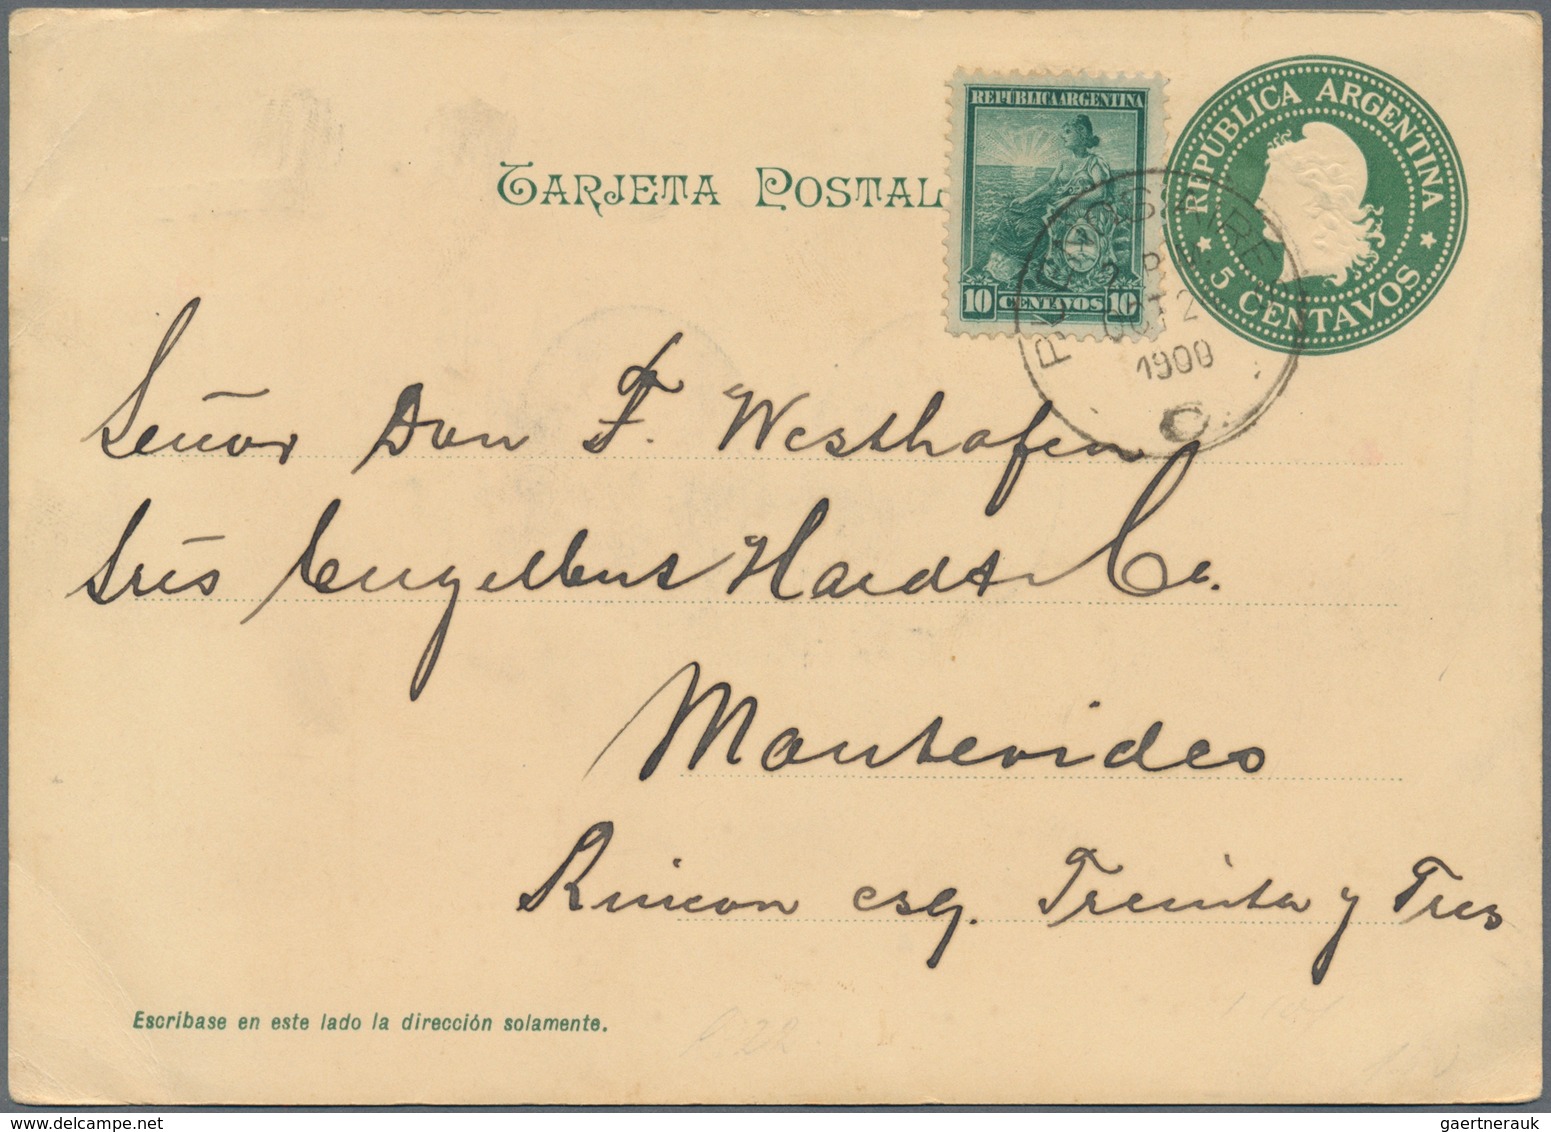 Argentinien - Ganzsachen: 1885/1921 (ca.), stationery mint/used (10/31) inc. 1949 p.o. box license 1